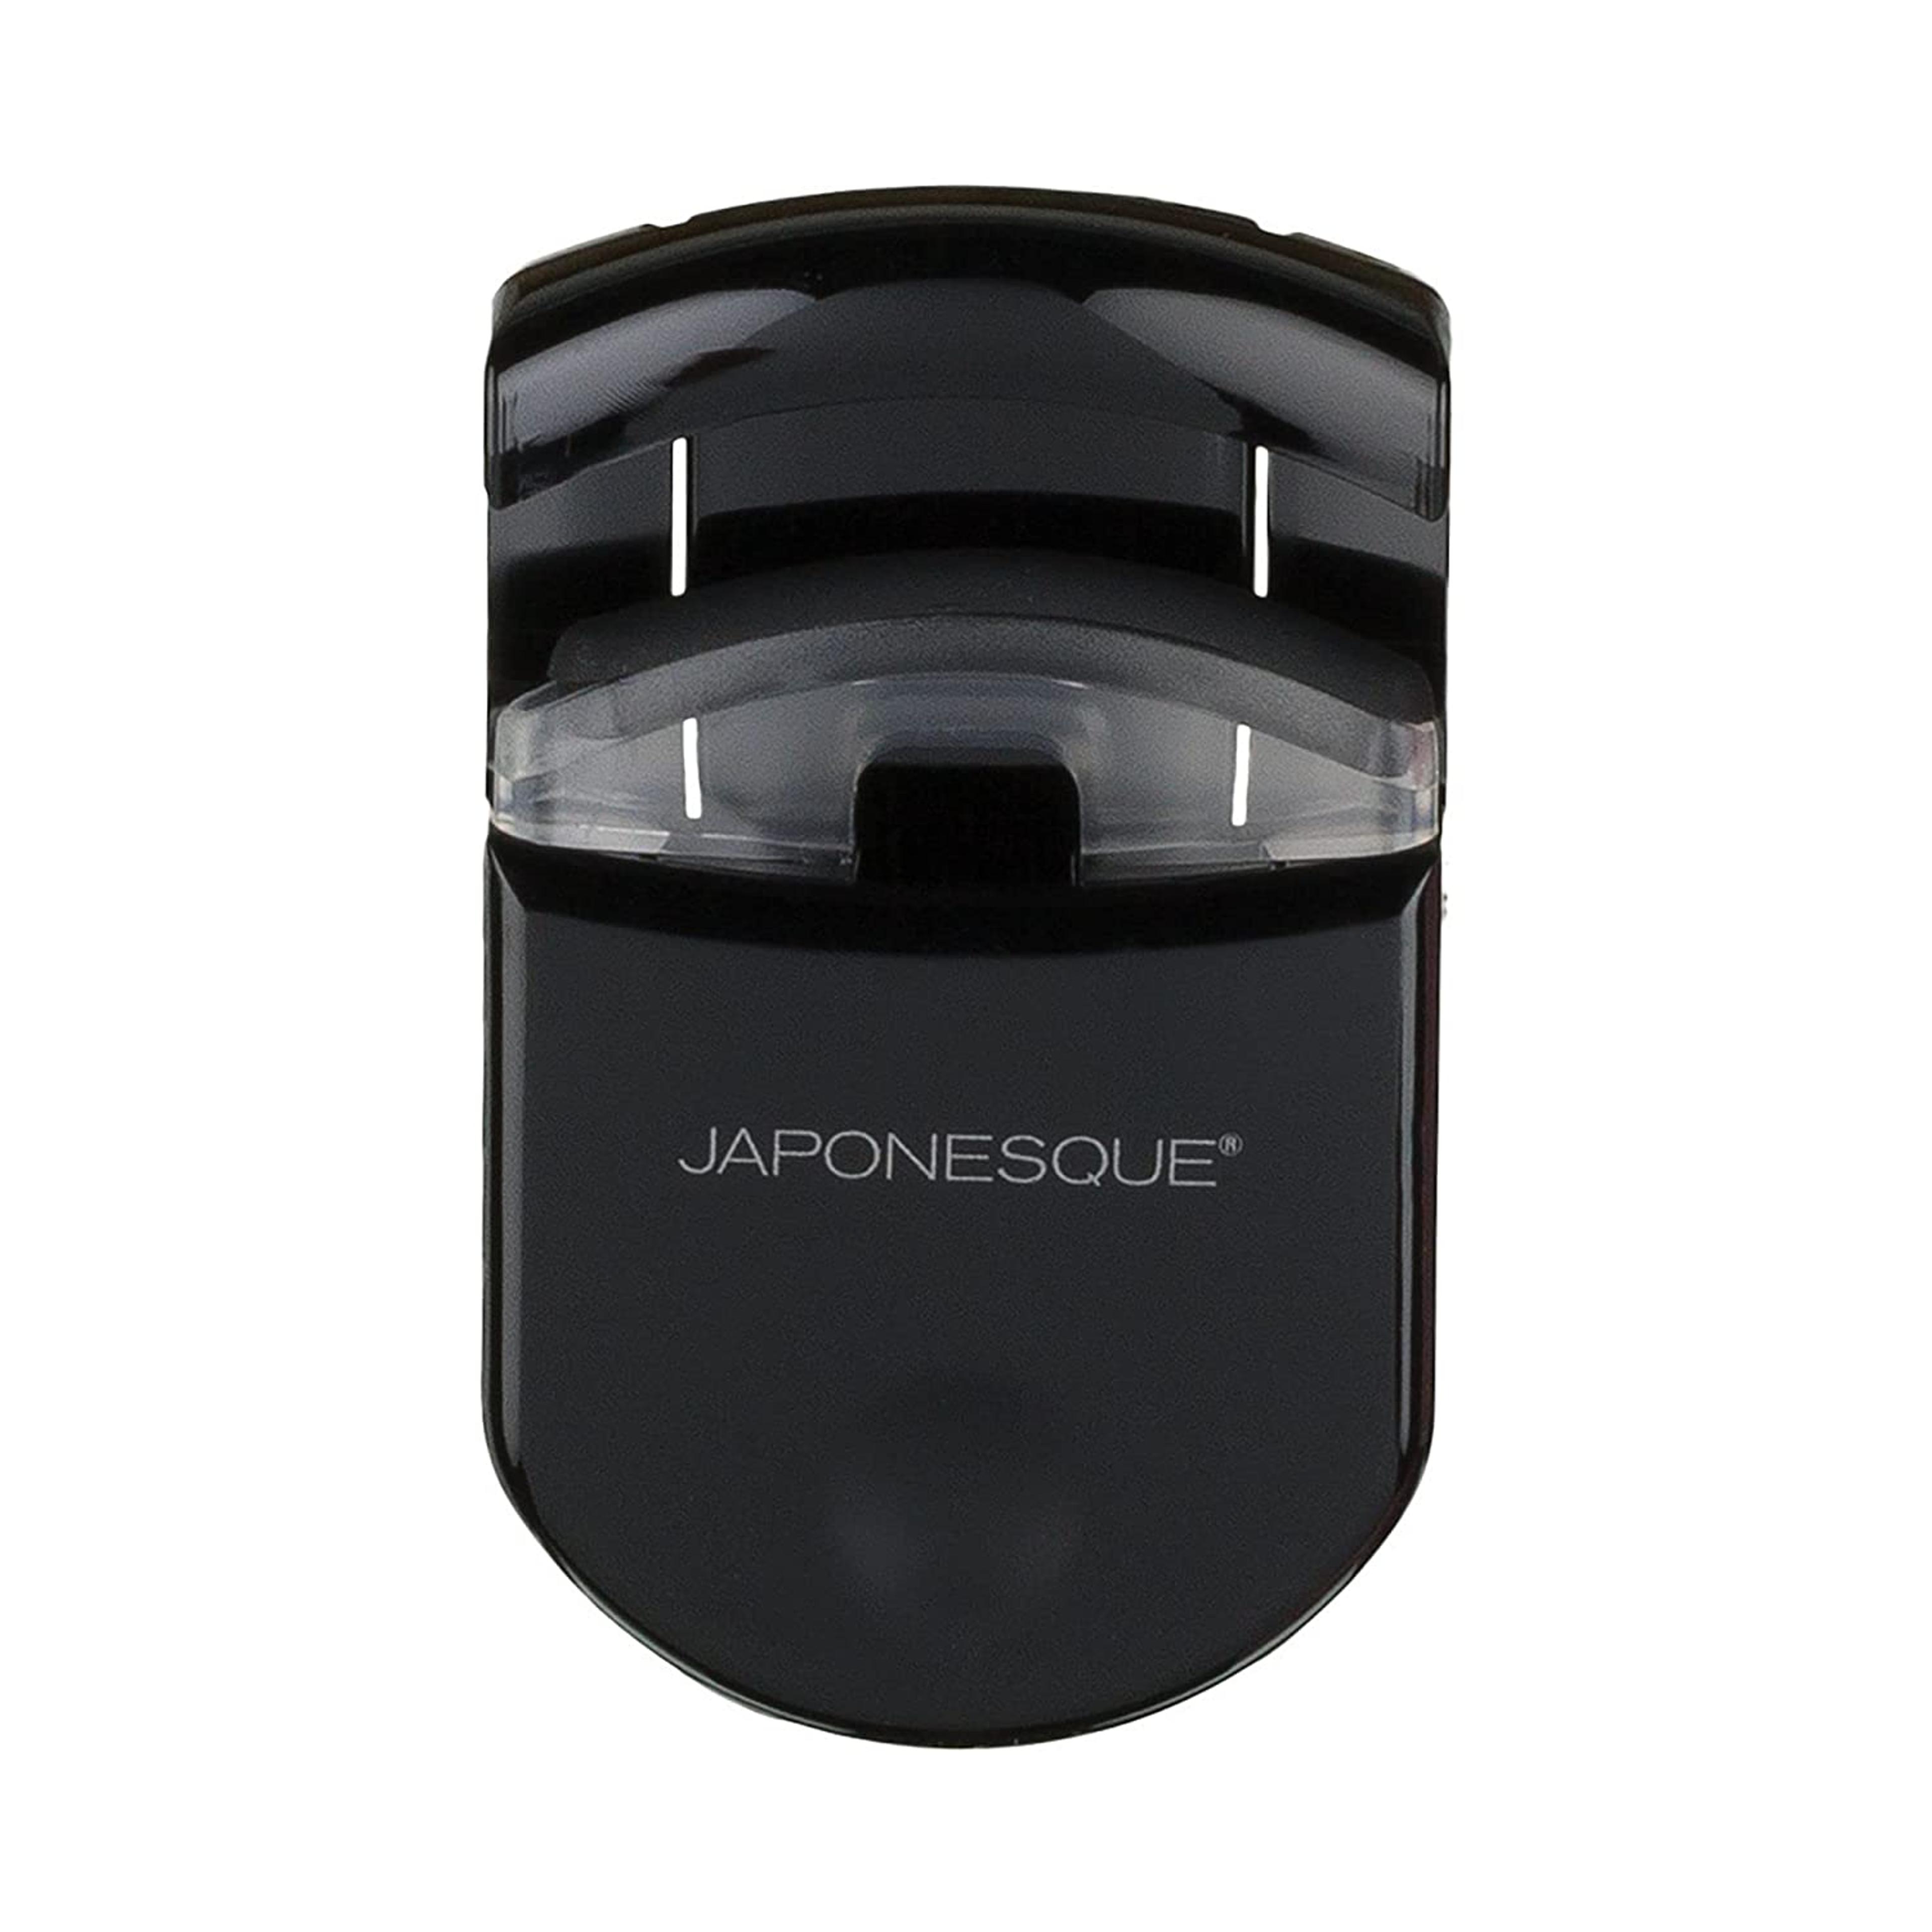 Japonesque Go Curl Travel Eyelash Curler, Perfect for On The Go Use, with Extra Soft, Gentle Lash Pad